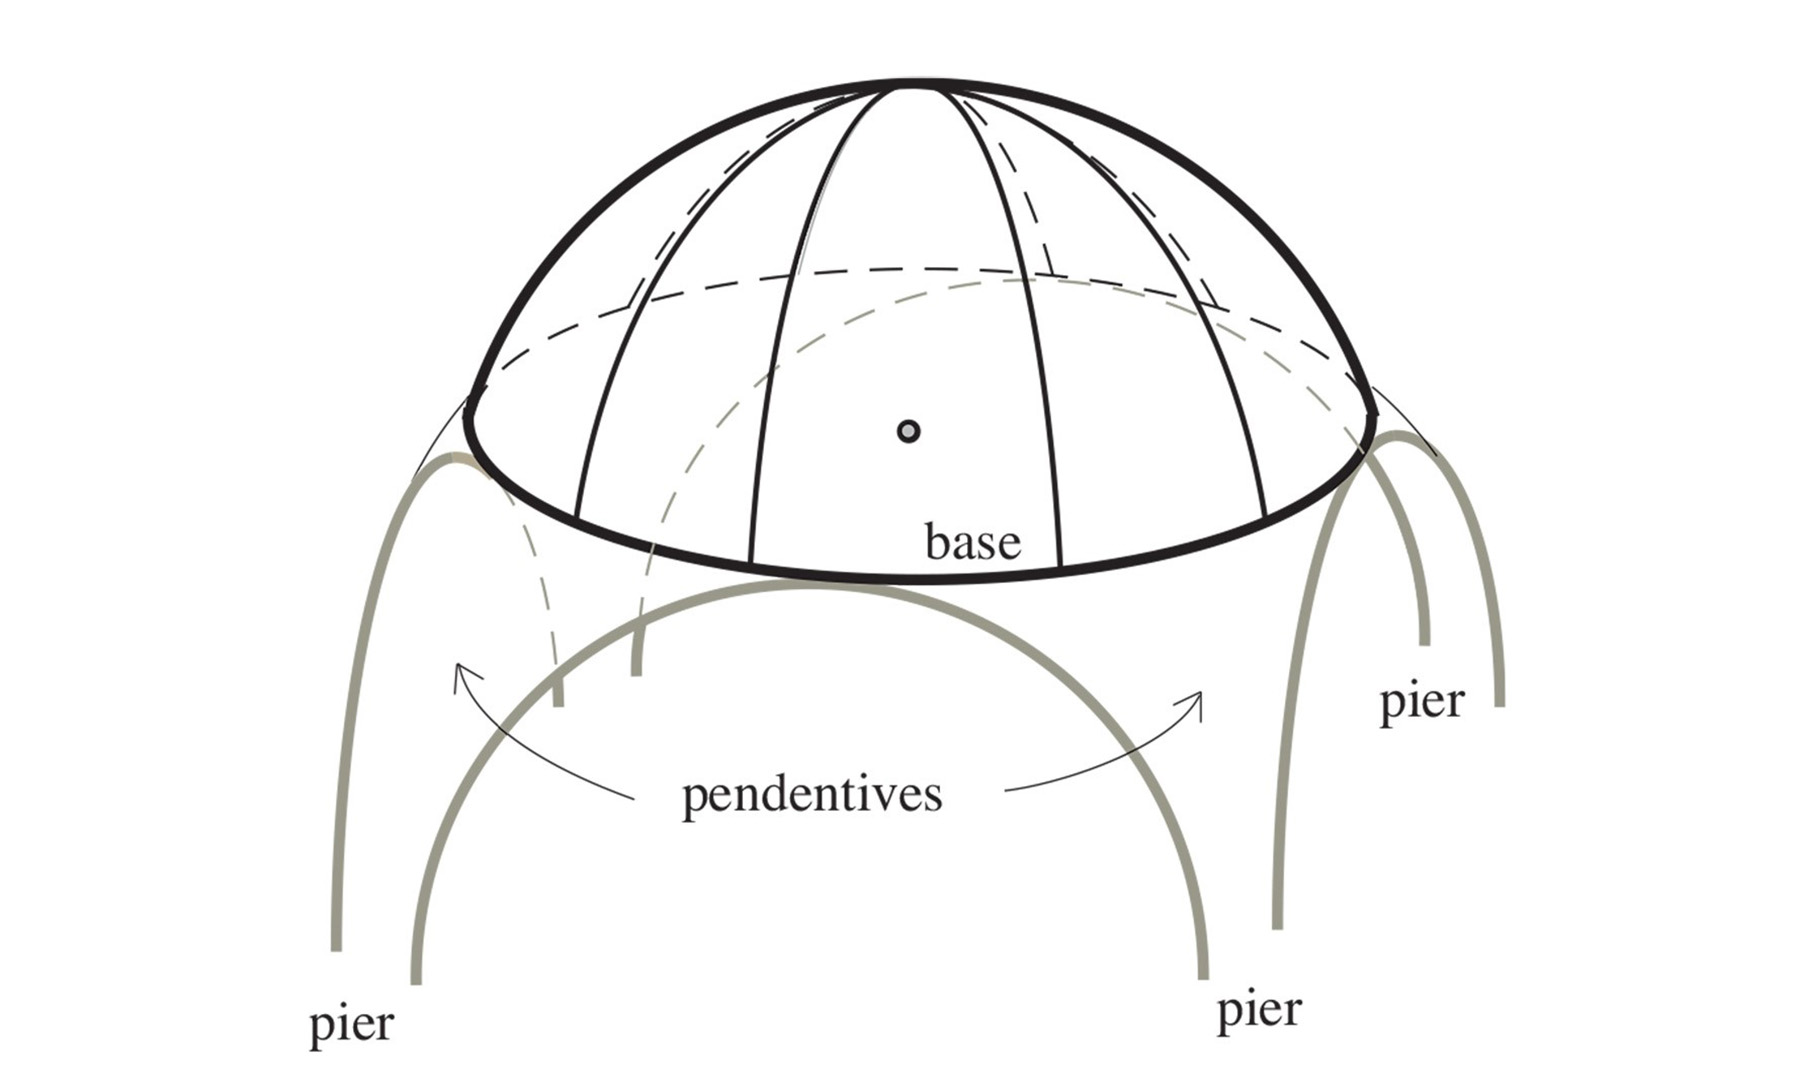 schematic drawing of a central dome showing piers, the base, and pendentives